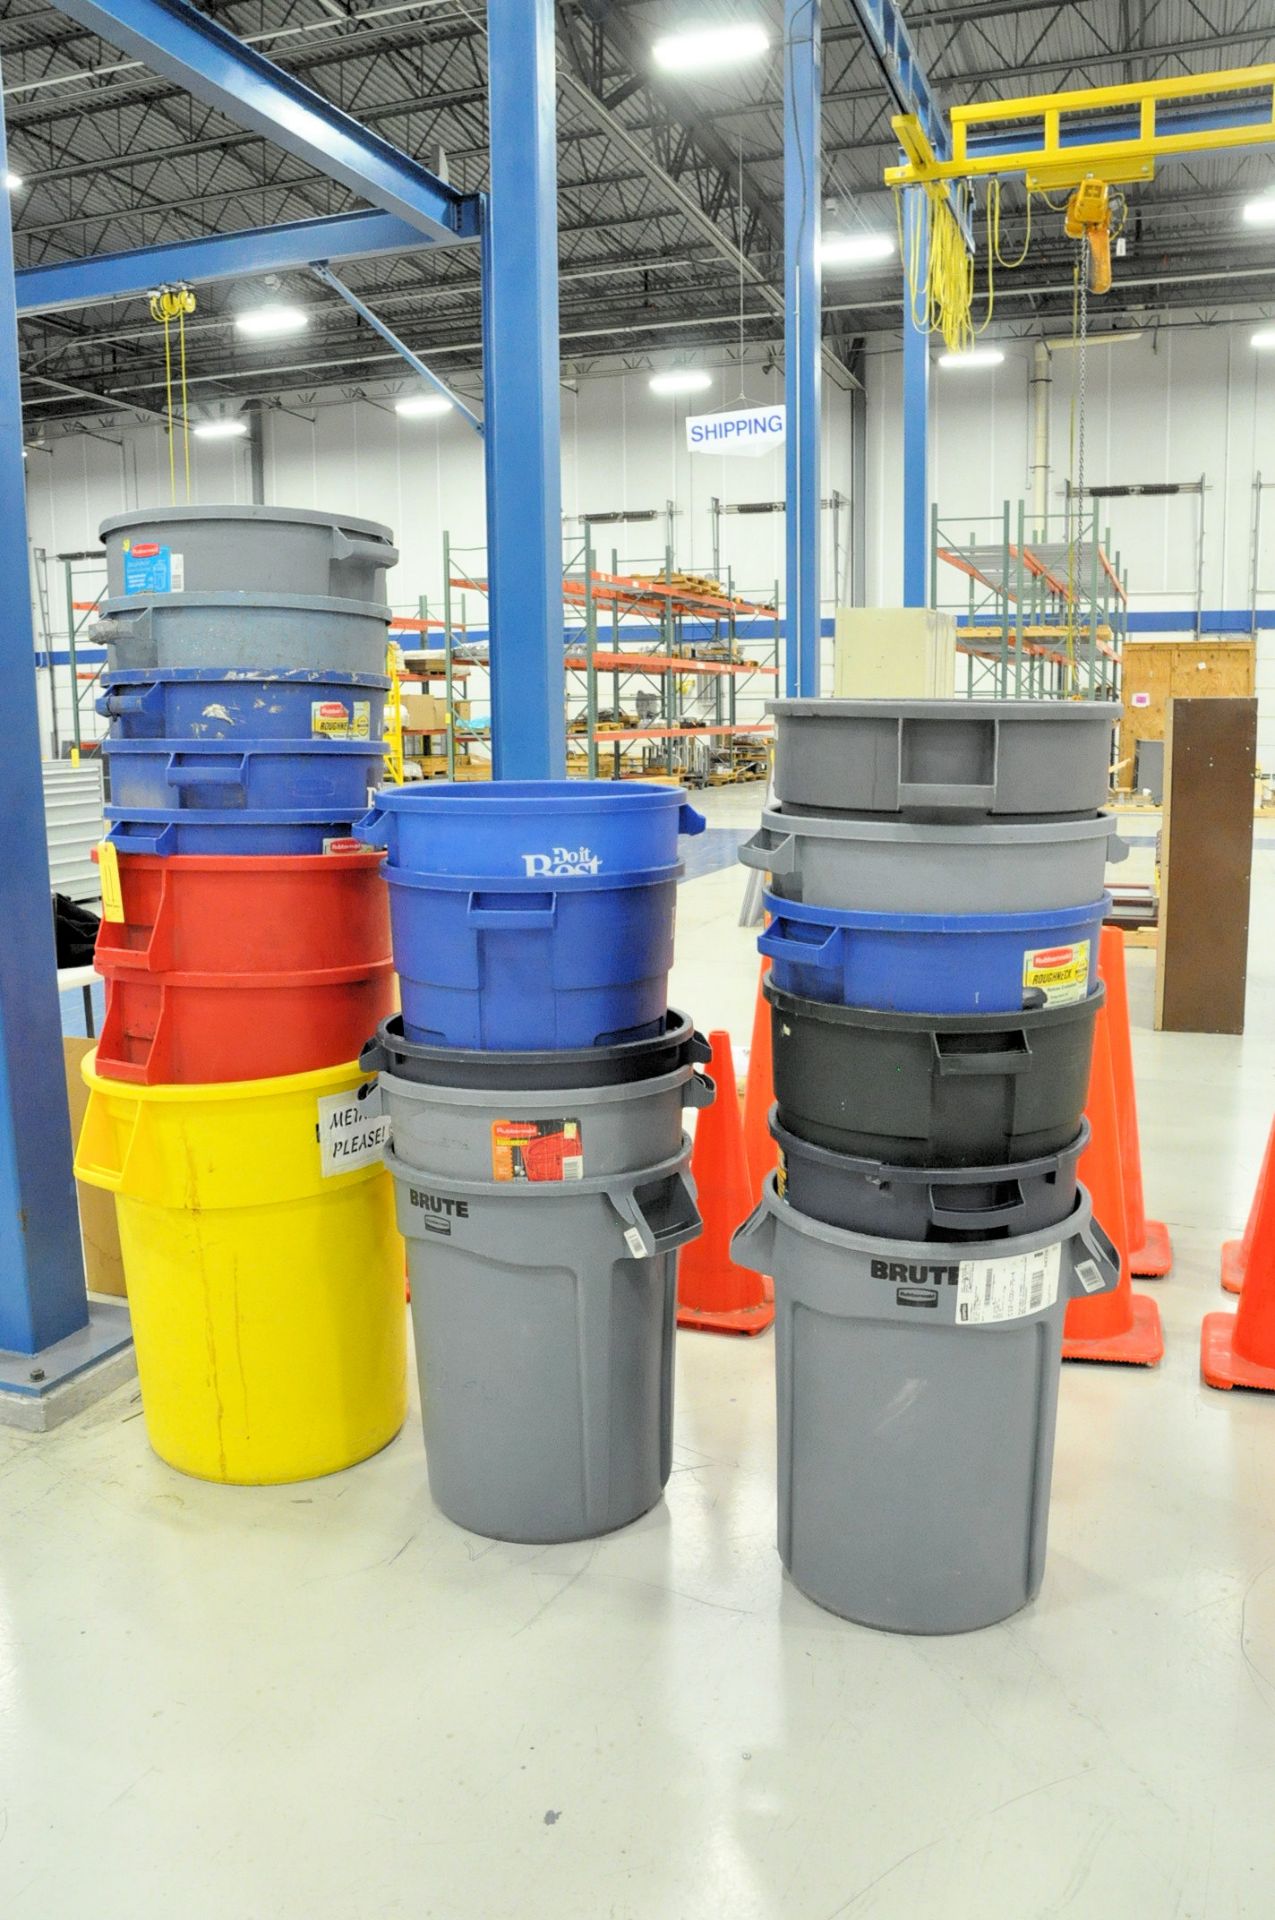 Lot-(19) Rubbermaid Style Garbage Cans in (3) Stacks